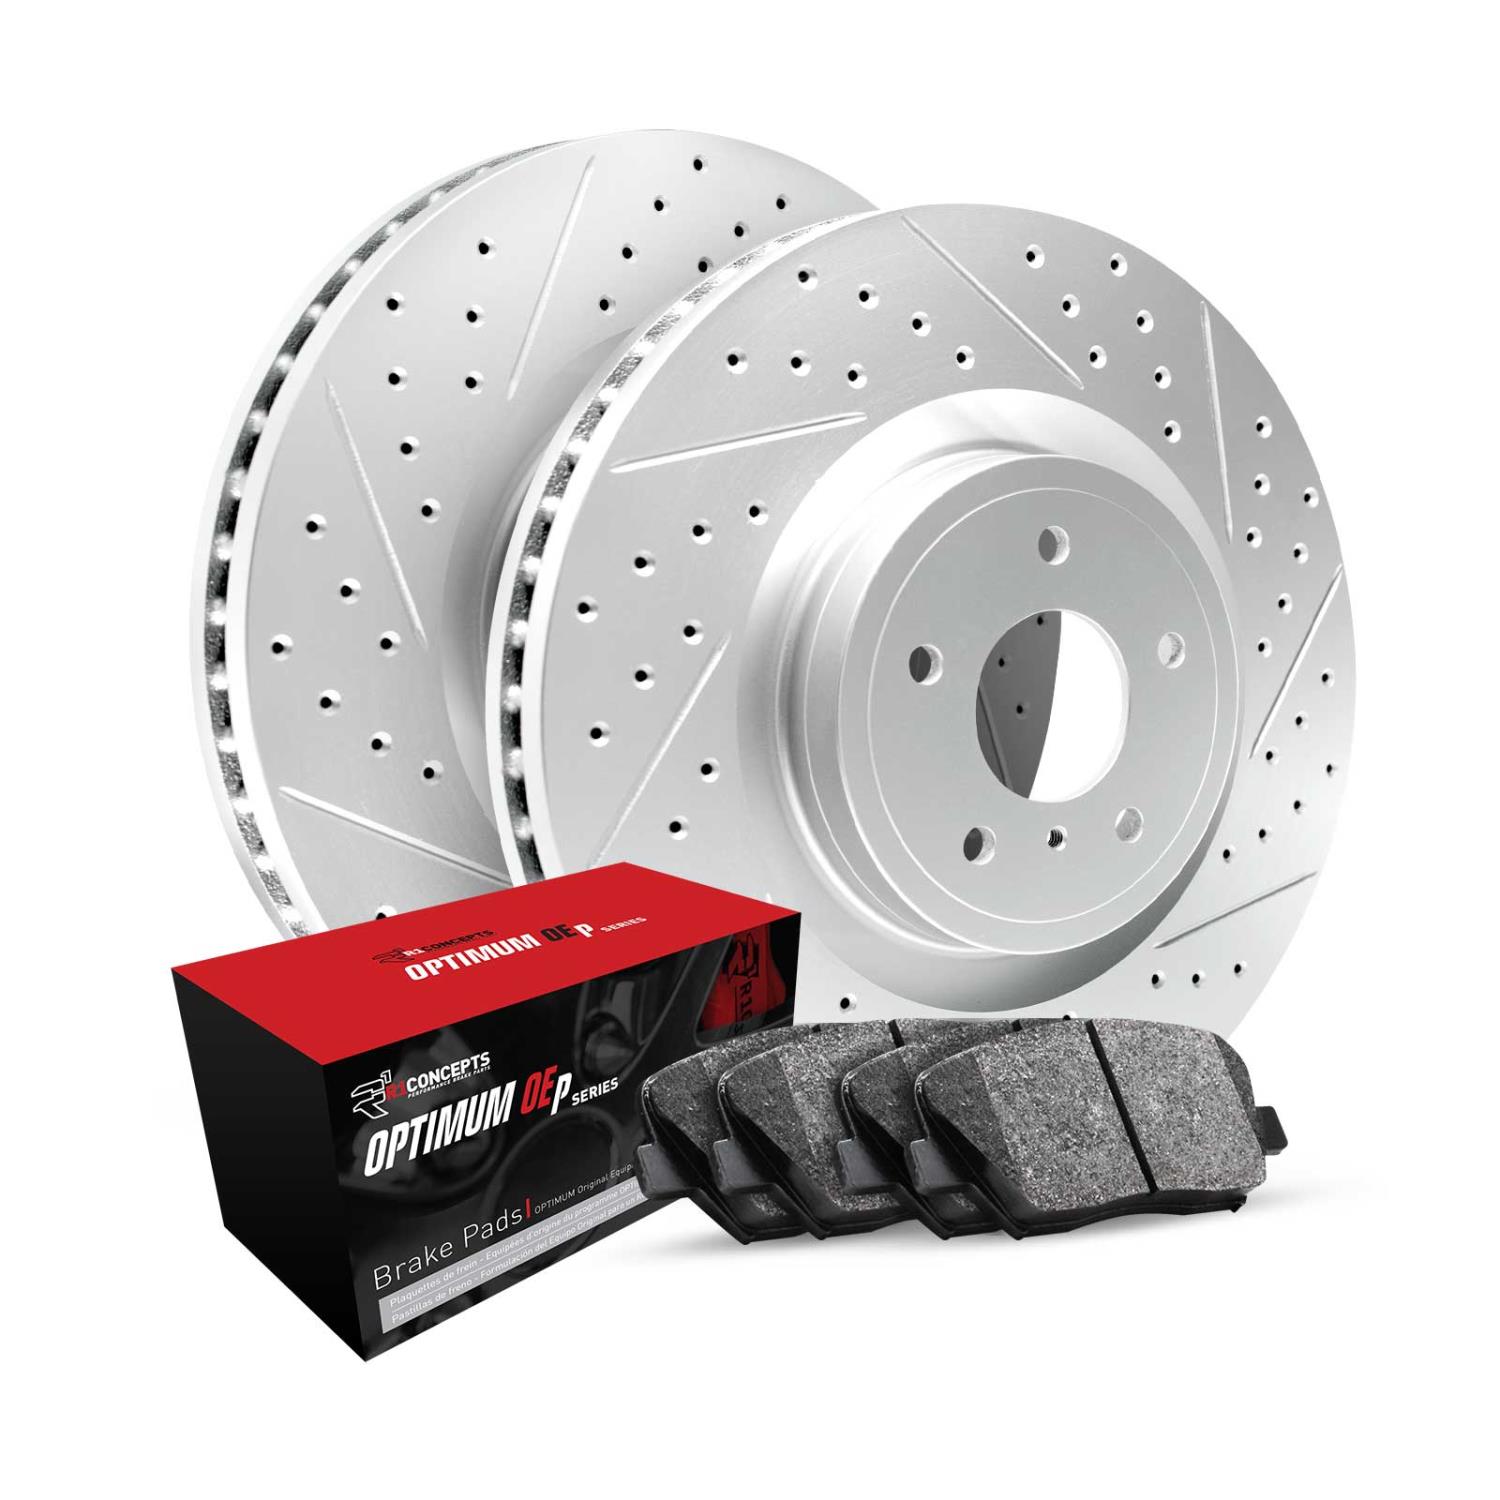 GEO-Carbon Drilled & Slotted Brake Rotor Set w/Optimum OE Pads, 1993-2002 Fits Multiple Makes/Models, Position: Rear